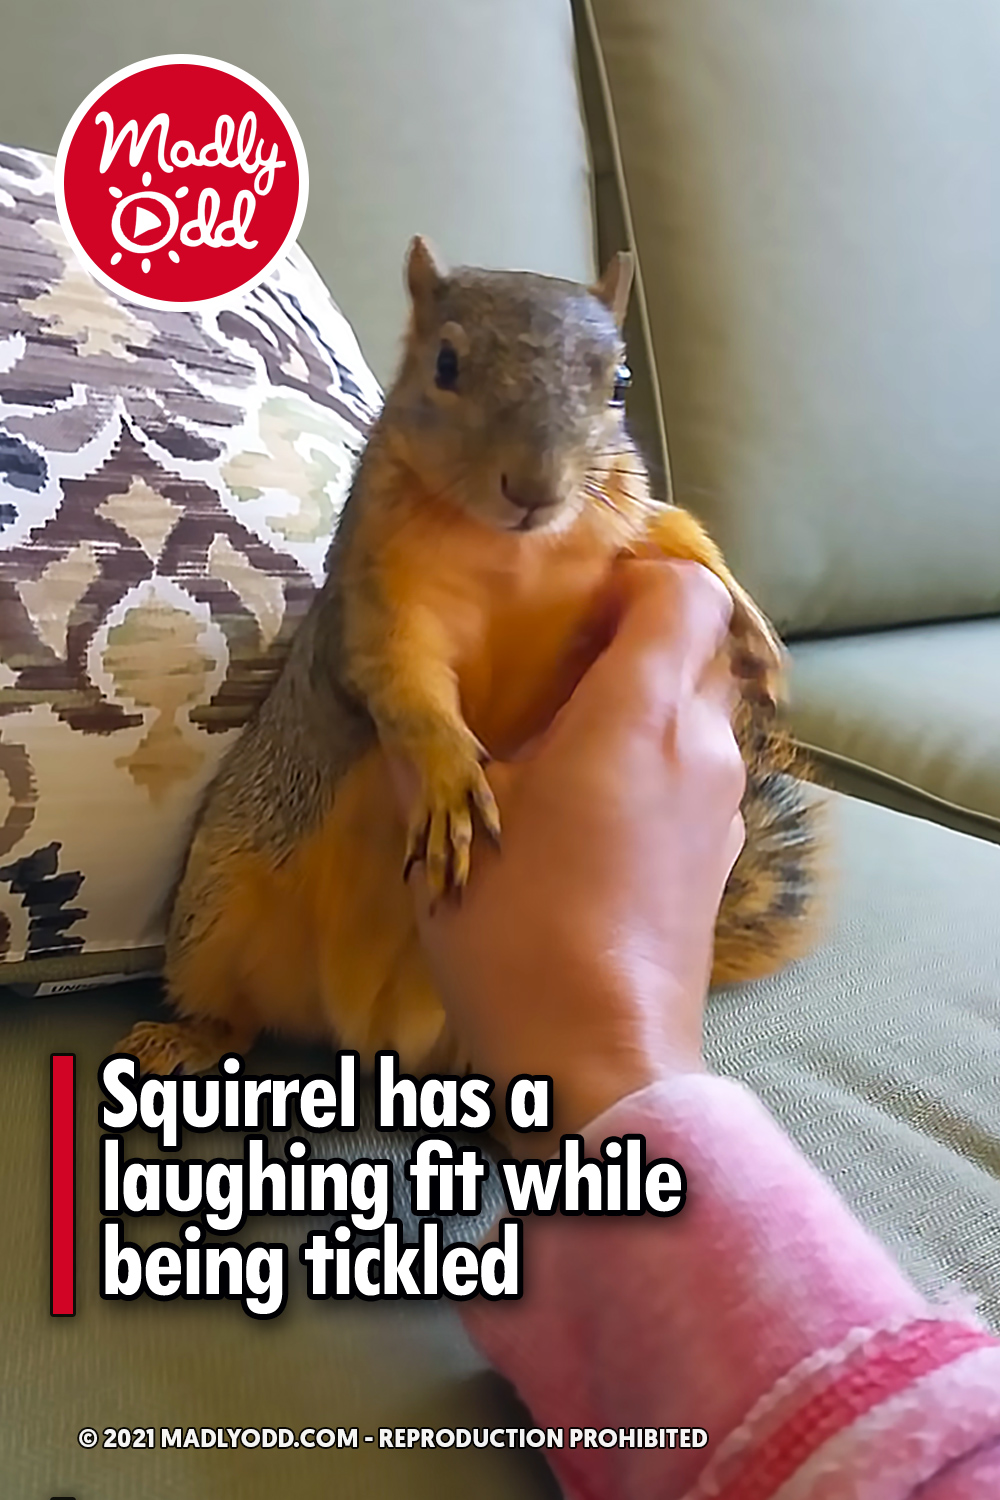 Squirrel has a laughing fit while being tickled